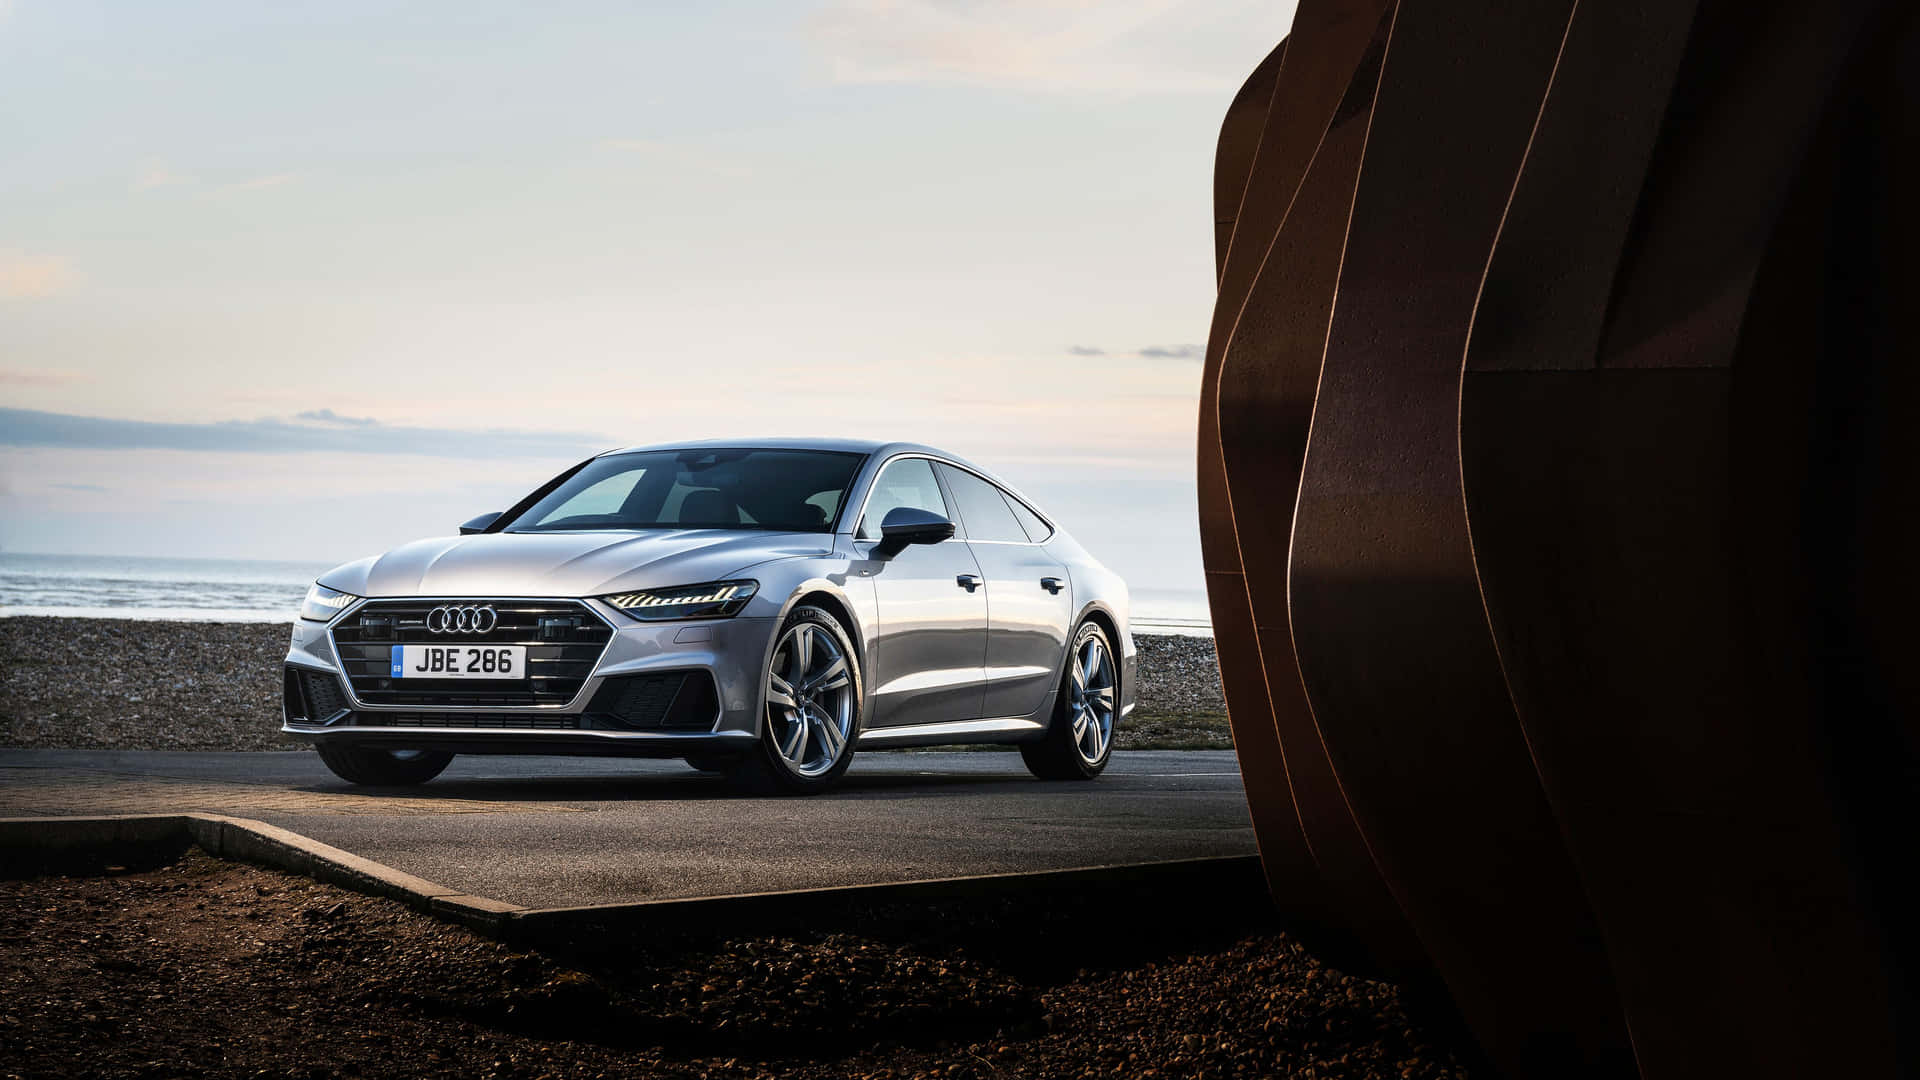 Stunning Audi S7 in motion on a picturesque road Wallpaper